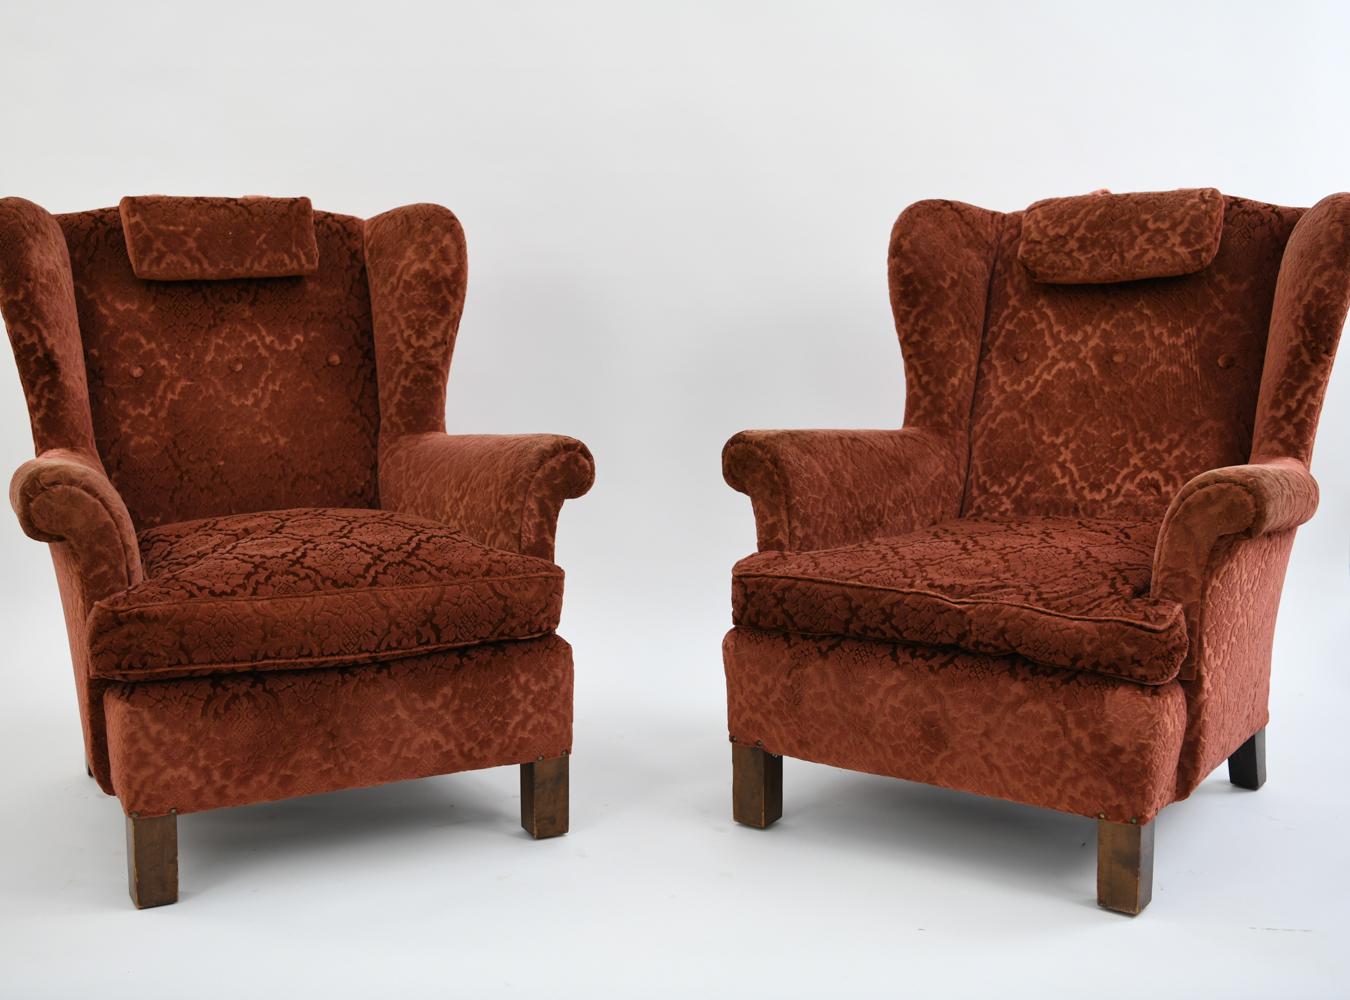 These 1940s Swedish wingback chairs by Nordiska Kompaniet scream comfort and elegance. Featuring luxuriously patterned red upholstery with matching head pillows. These fine chairs were made at the time where designers as Carl Malmsten, Axel Einar